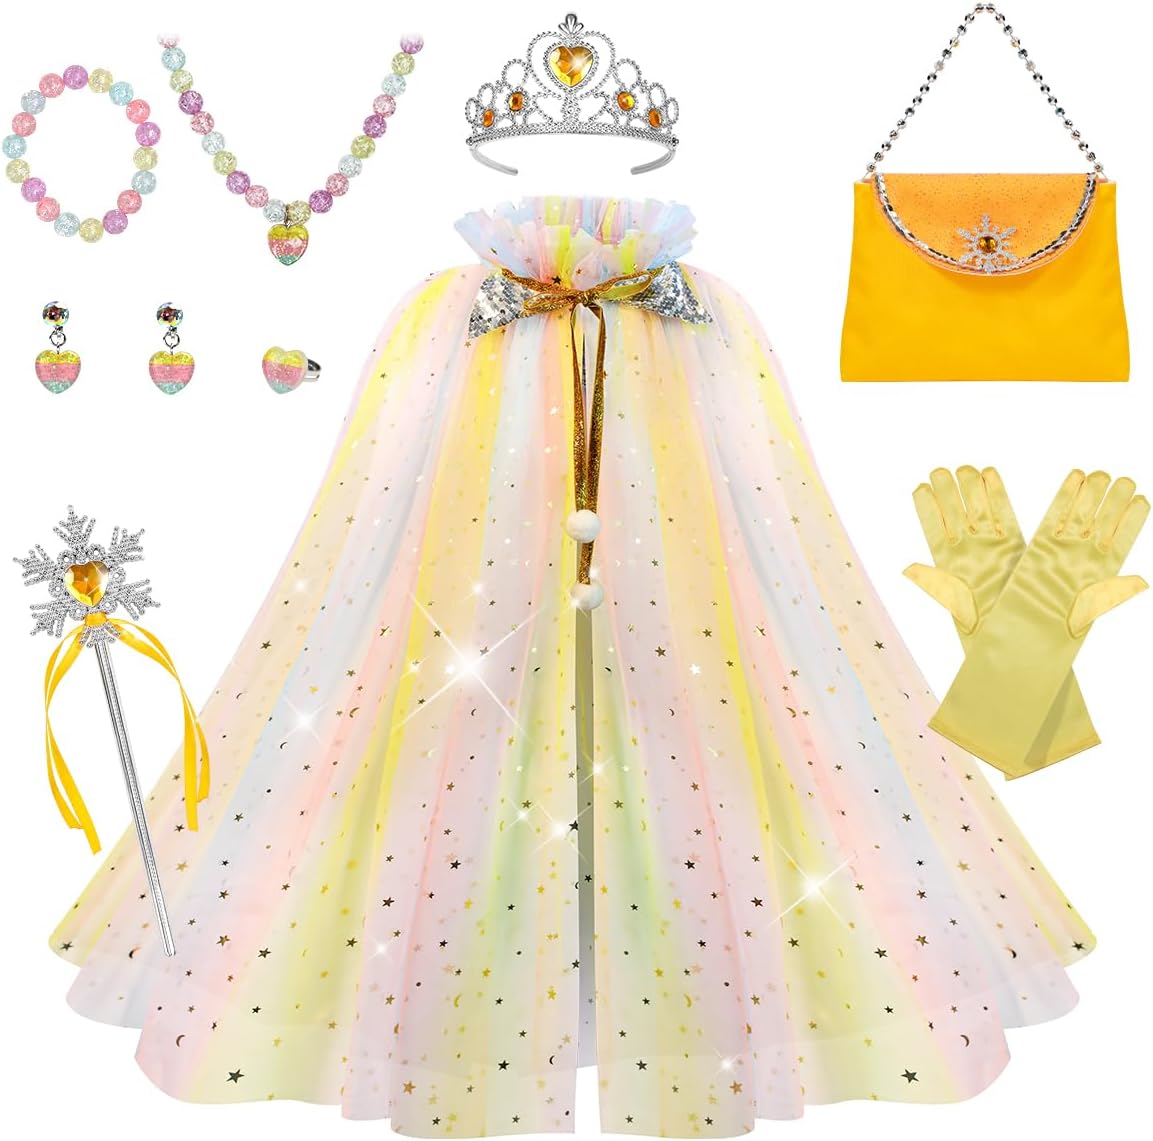 Princess Dress up Clothes for 3-8 Years Little Girl, 11Pcs Princess Cape with Crown